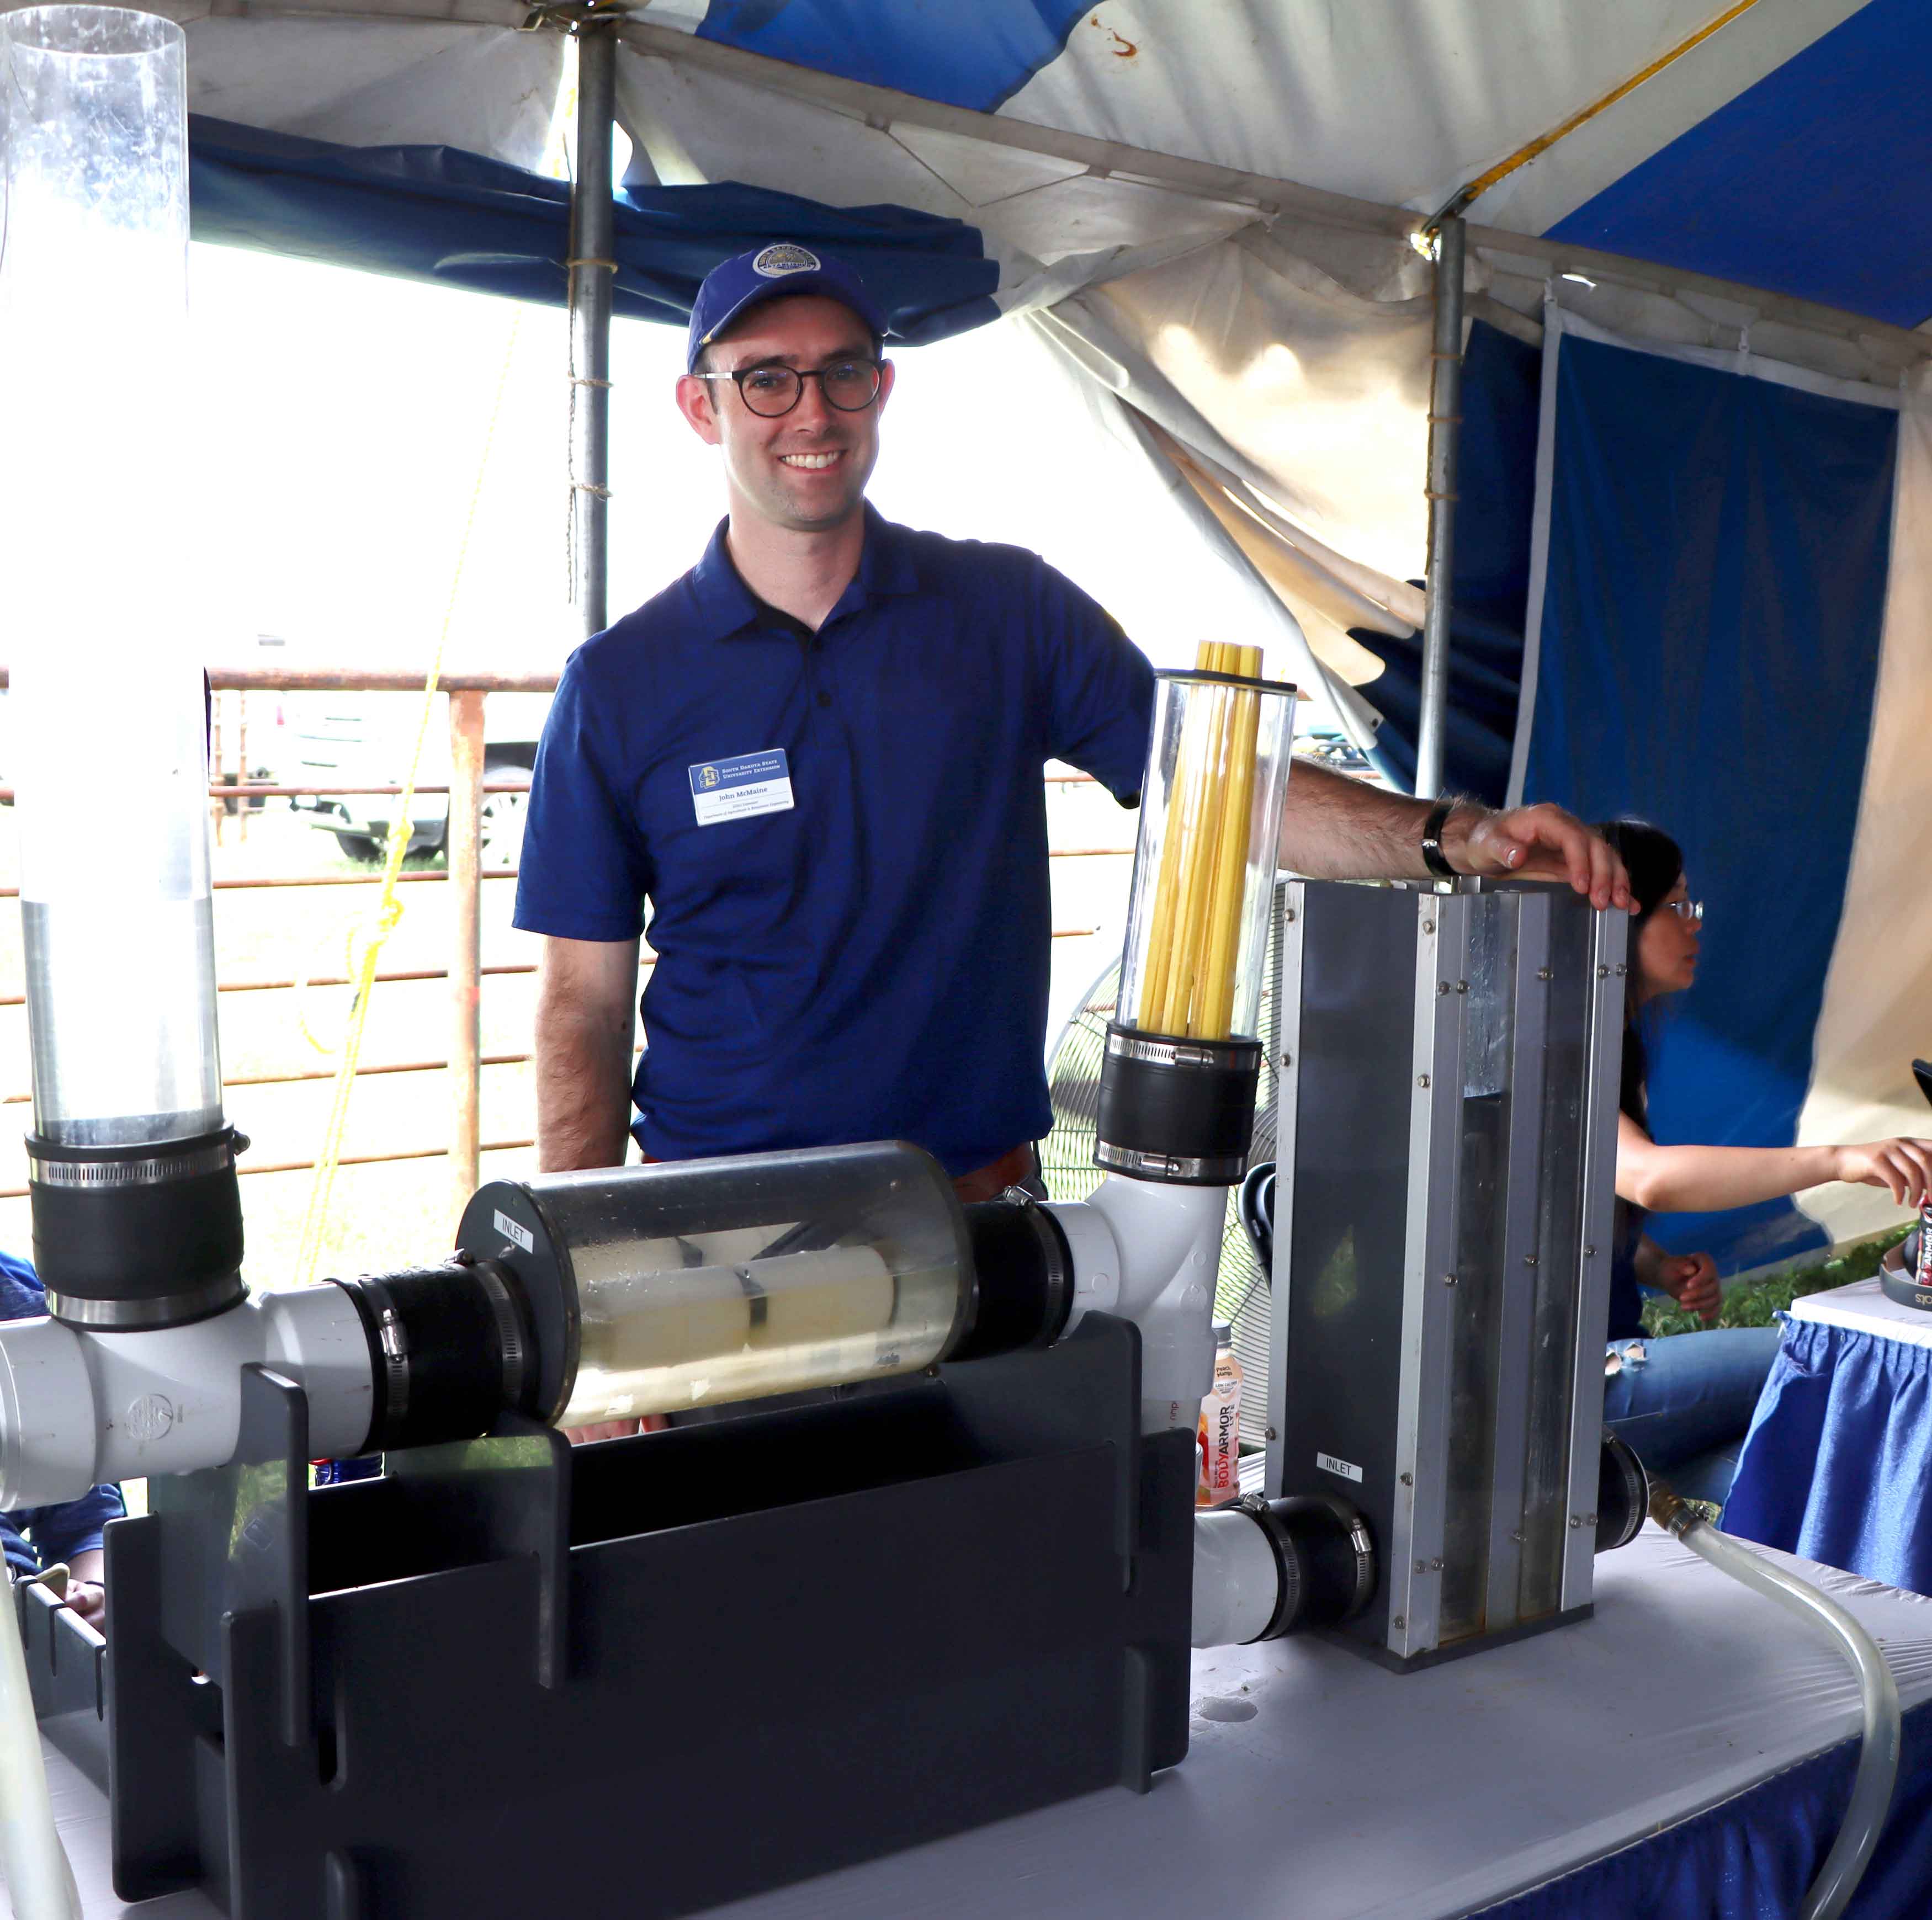 John McMaine stands smiling behind water equipment inside the SDSU Extension booth at Dakotafest